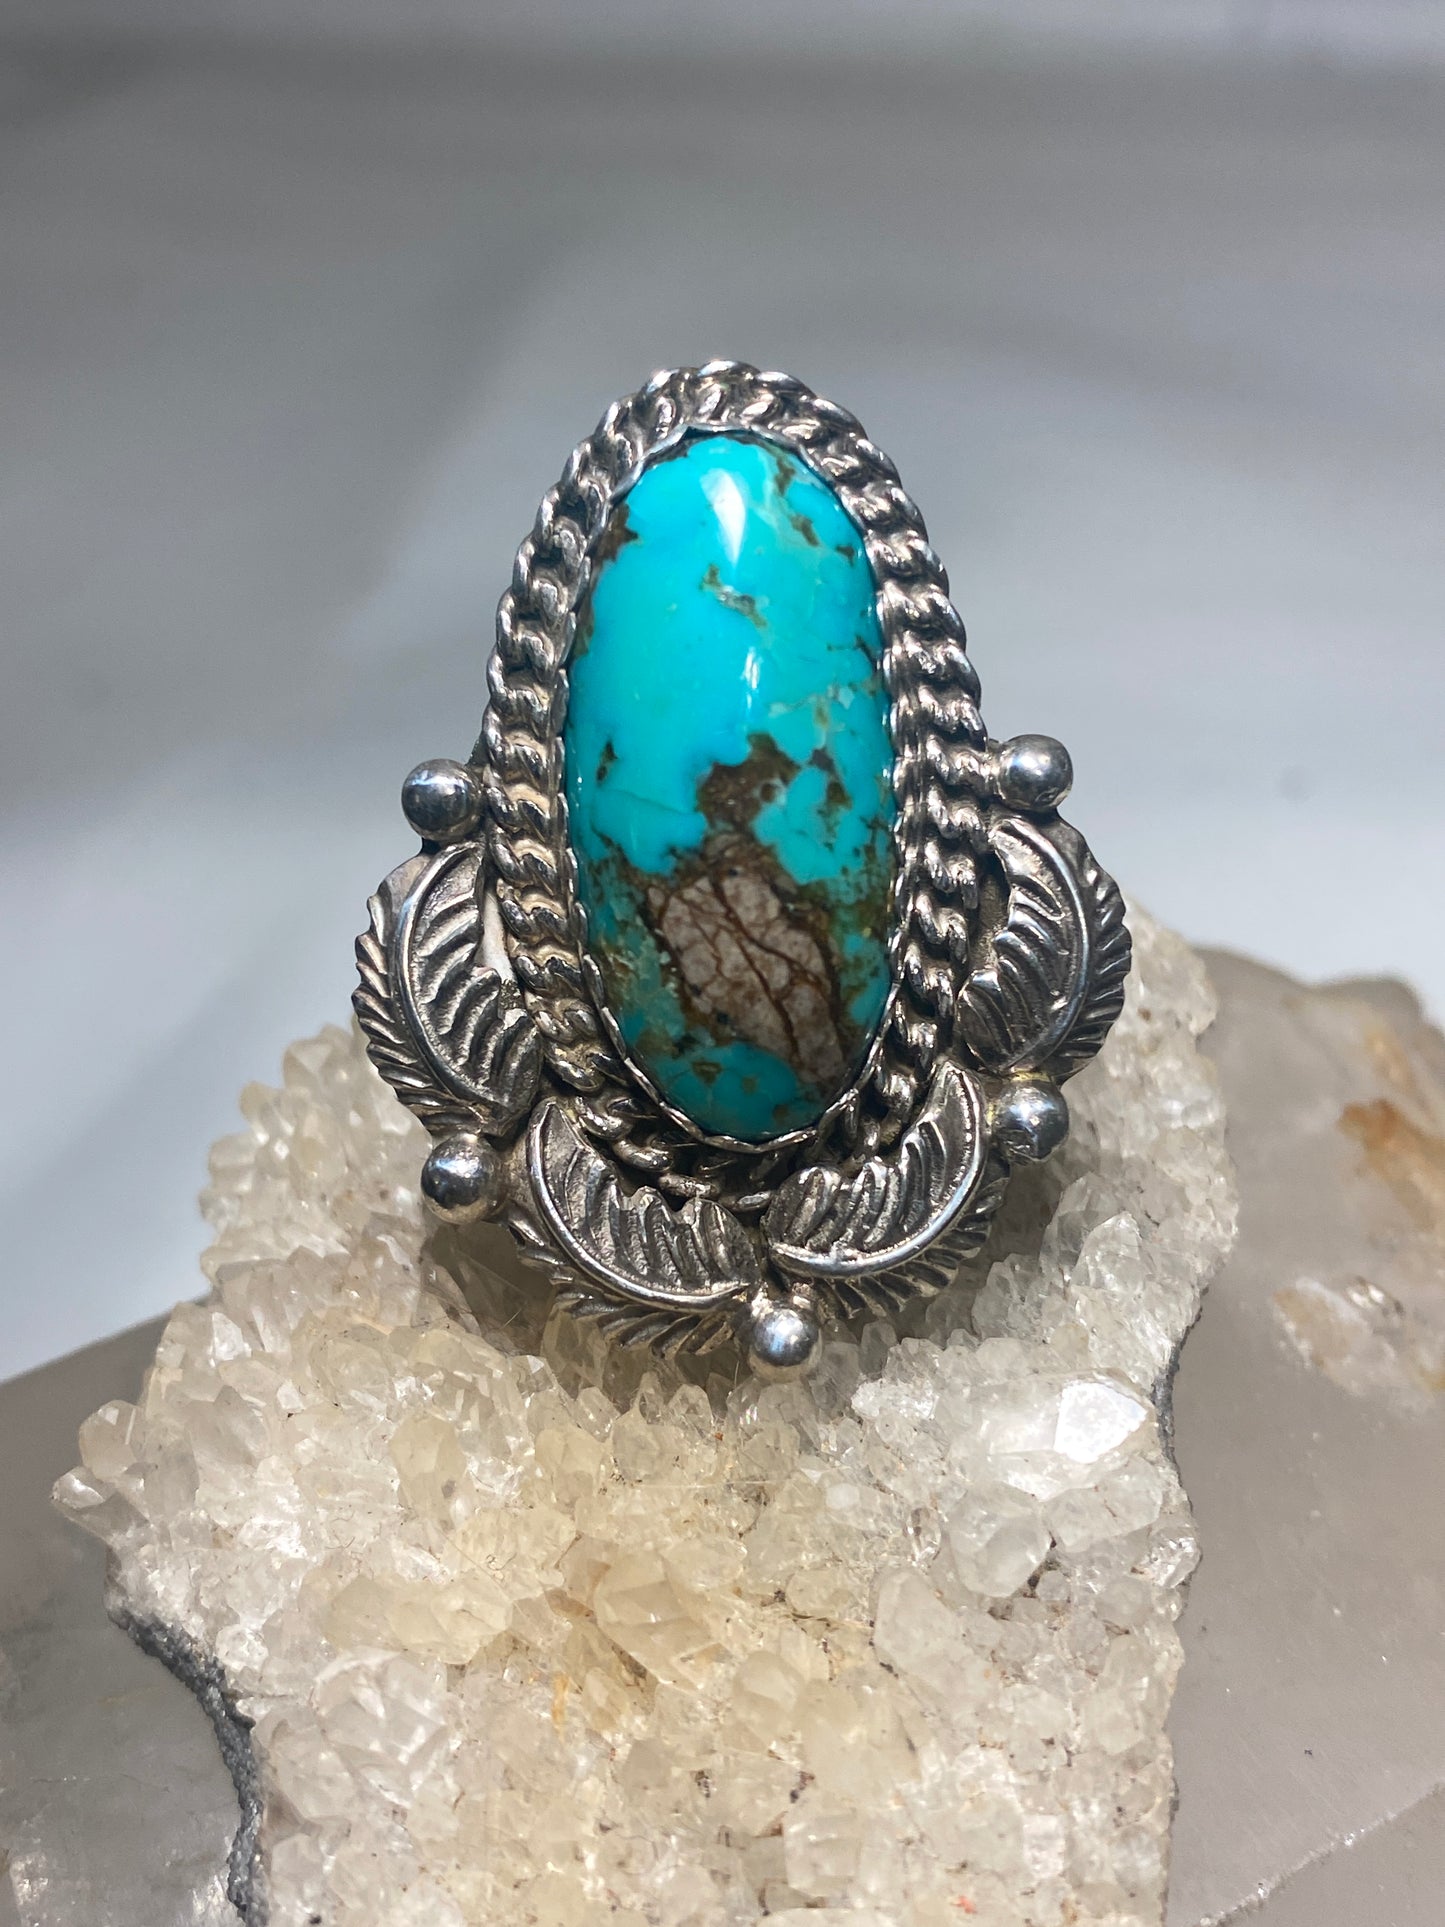 Turquoise ring long Navajo feathers  band sterling silver women girls